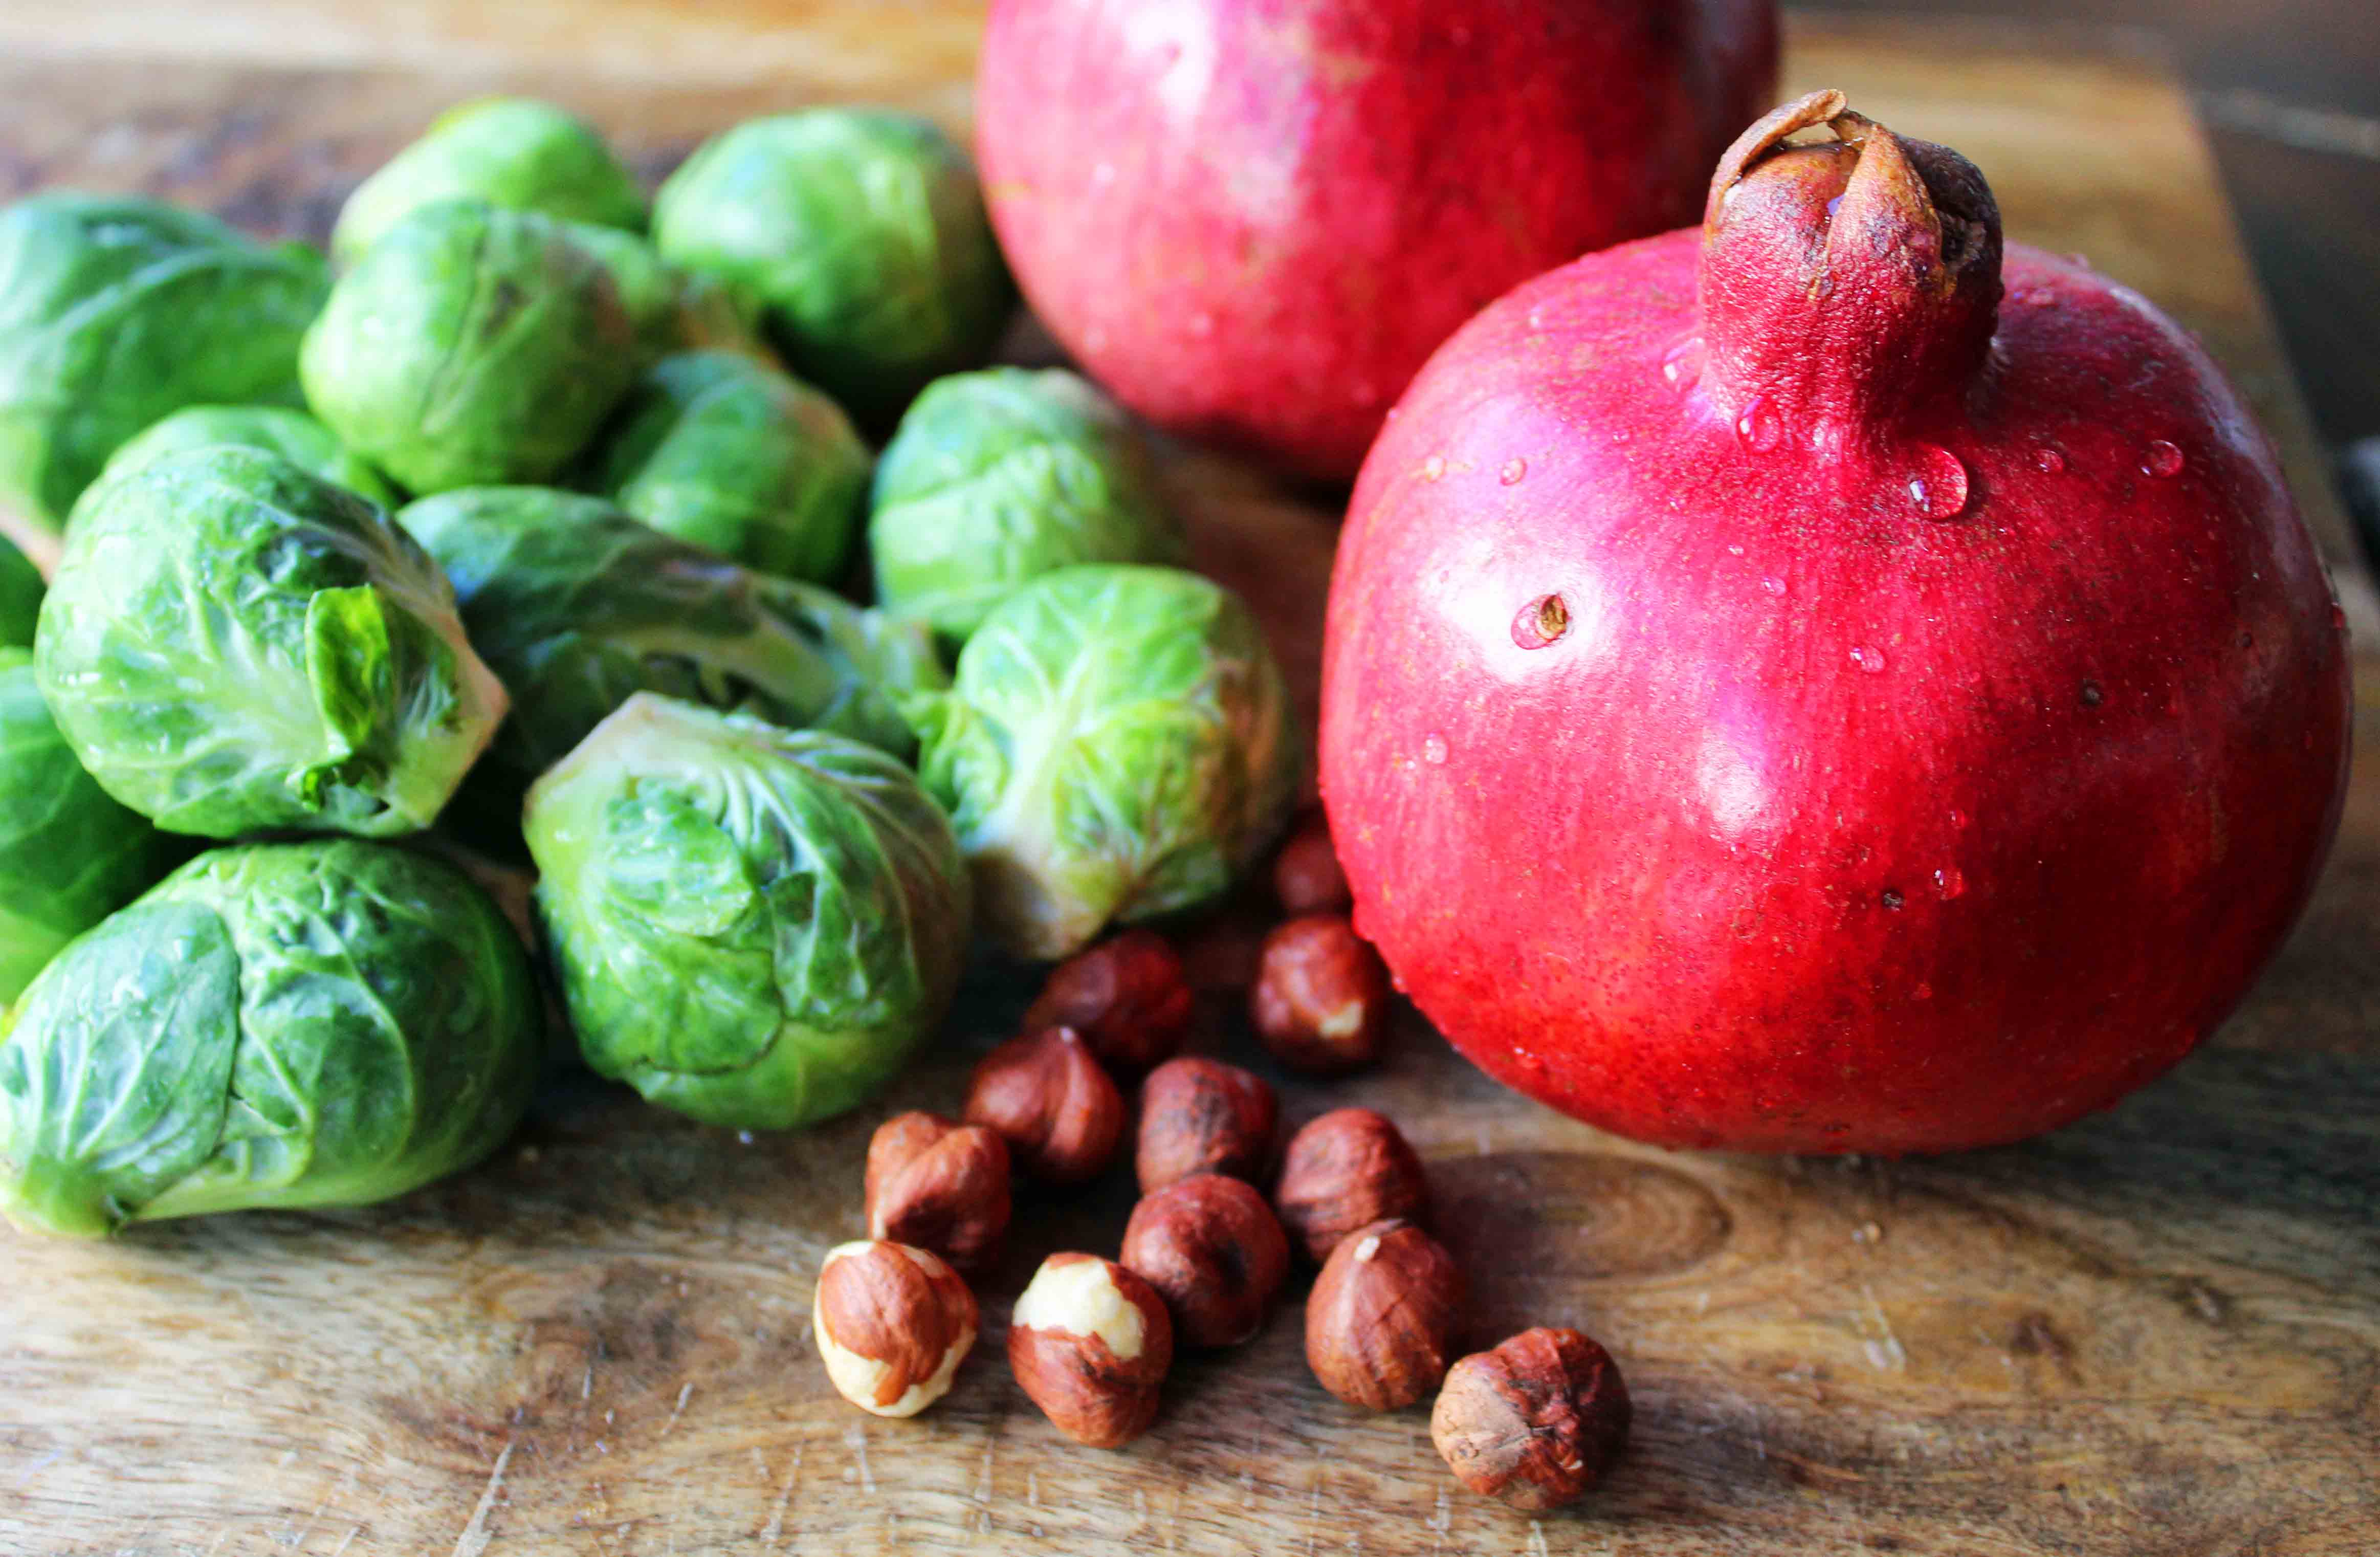 Bacon Roasted Brussels Sprouts with Pomegranates by Modern Honey. Roasted Brussels Sprouts in Extra Virgin Olive Oil, Crispy Bacon, Pomegranates, and Hazelnuts. The perfect healthy Thanksgiving side dish.